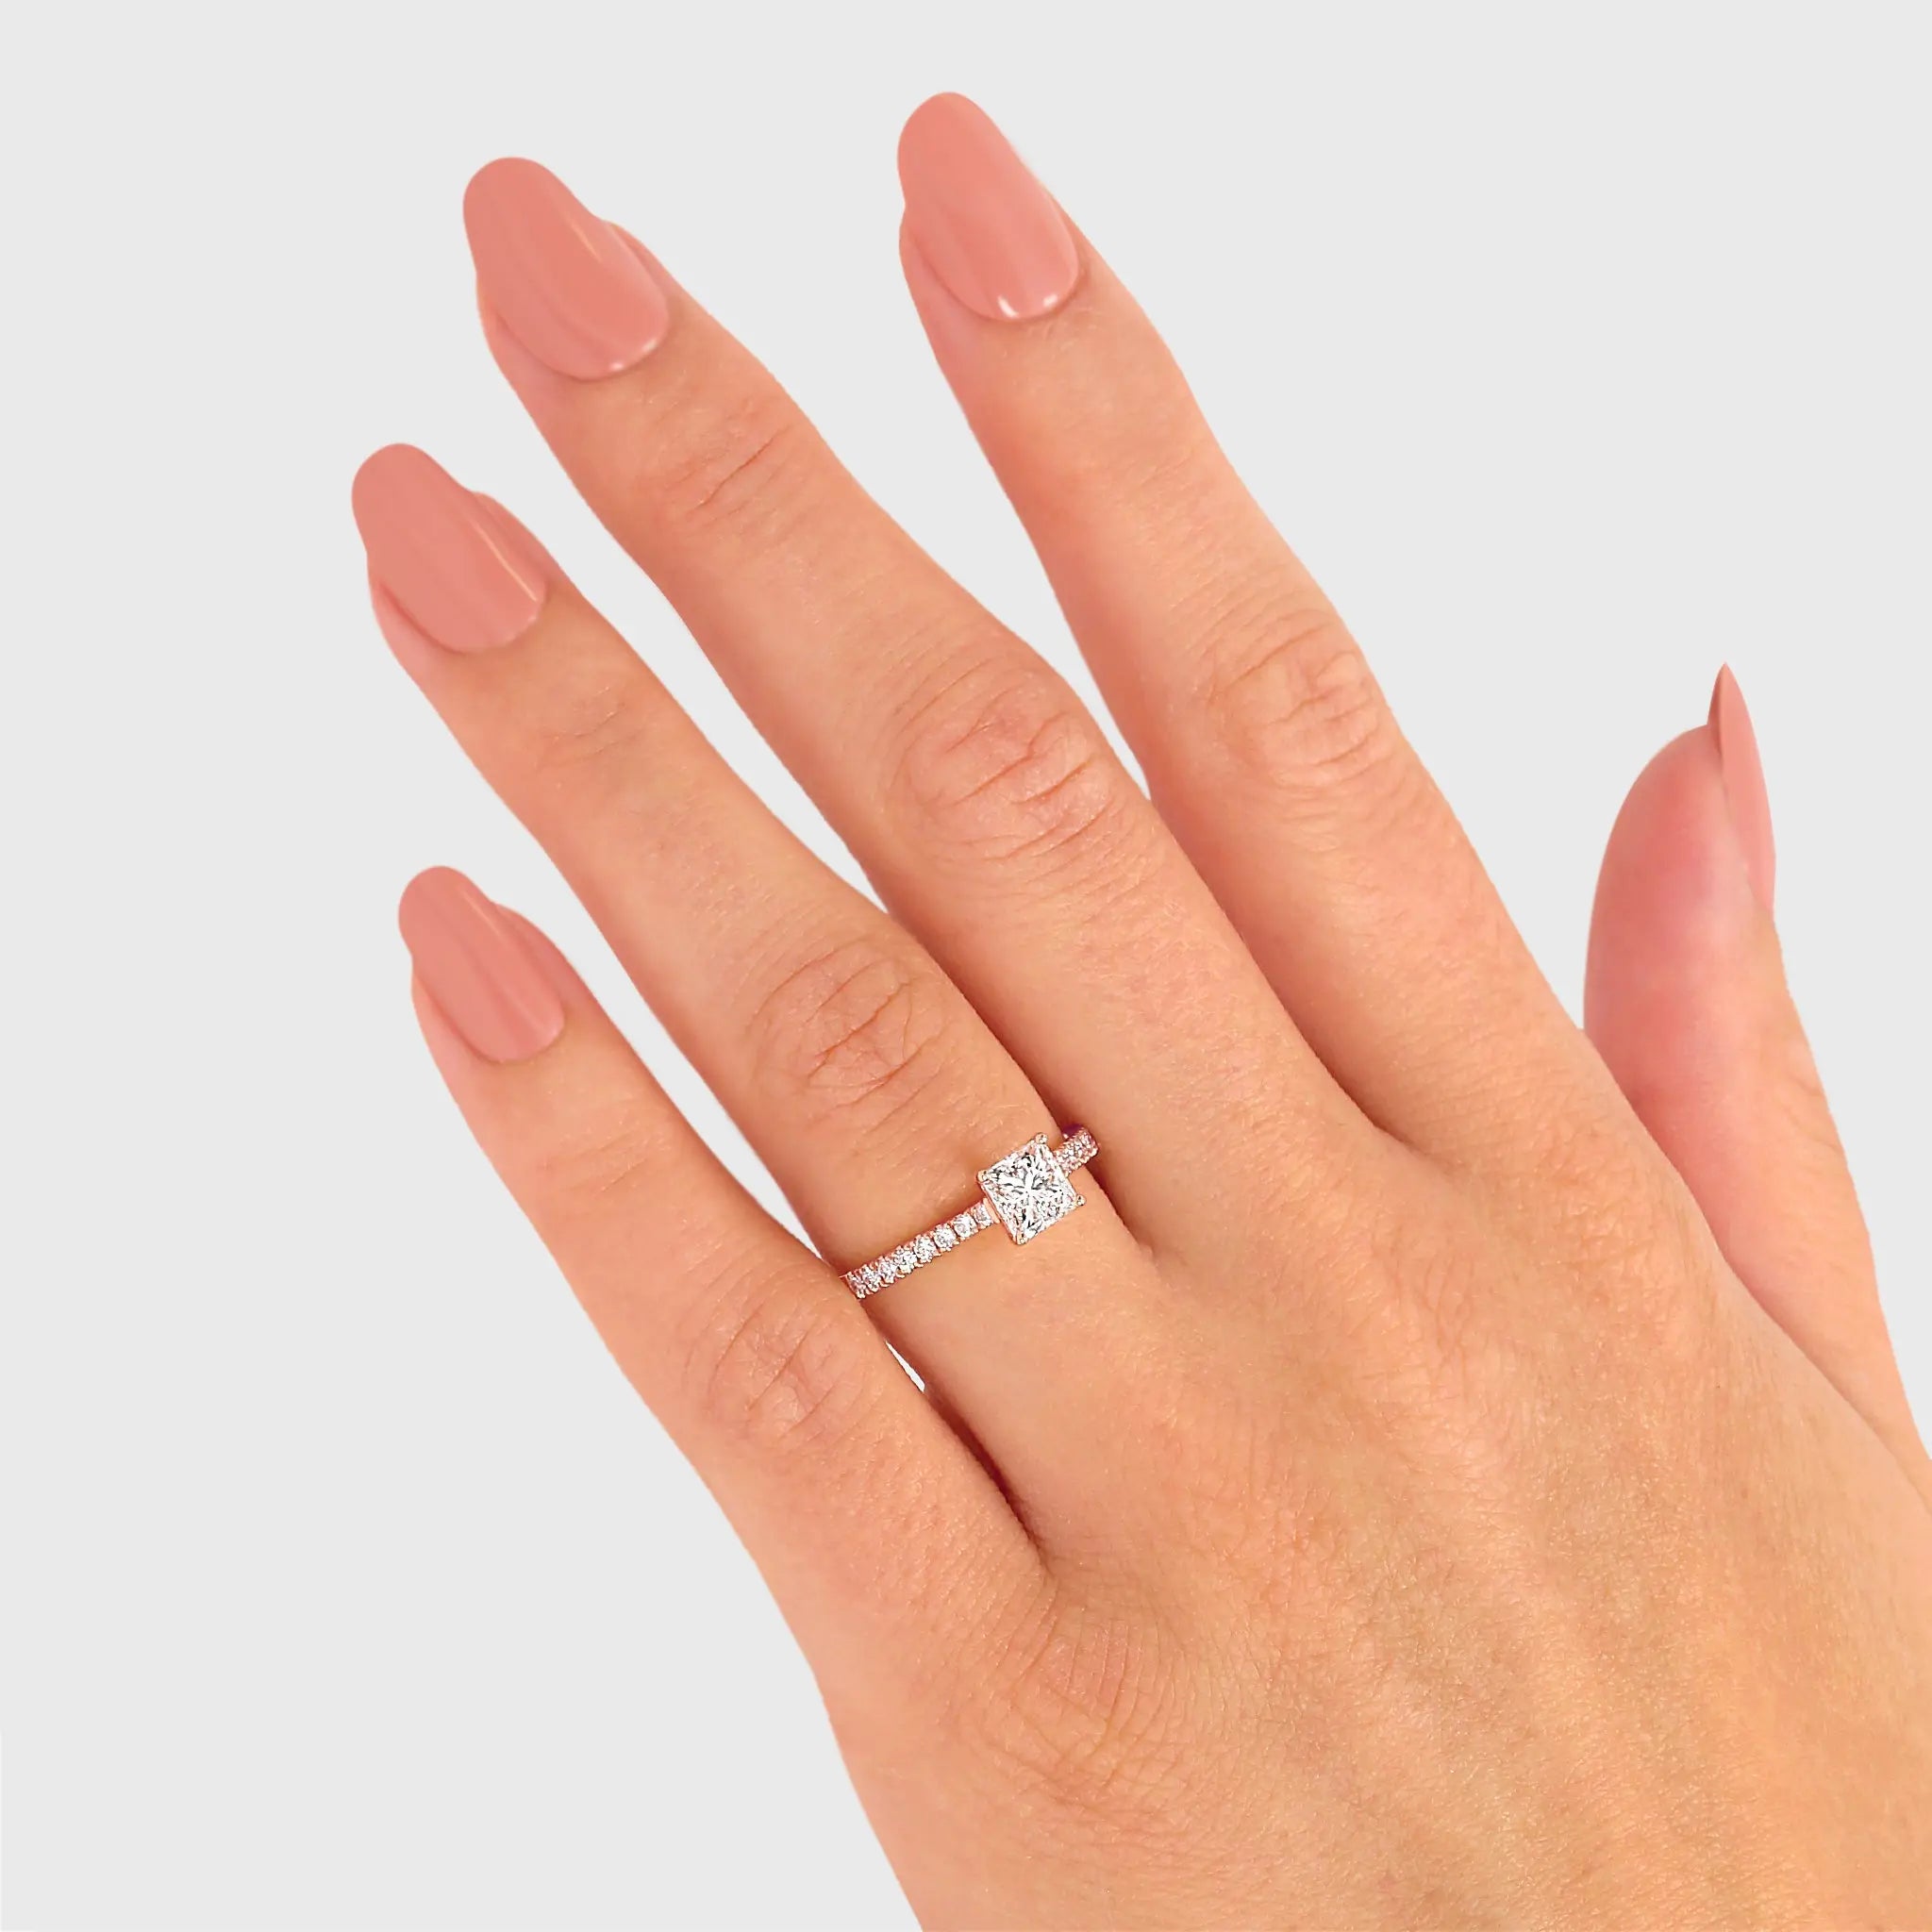 Shimansky - Women Wearing the My Girl Diamond Microset Engagement Ring 1.00ct Crafted in 18K Rose Gold